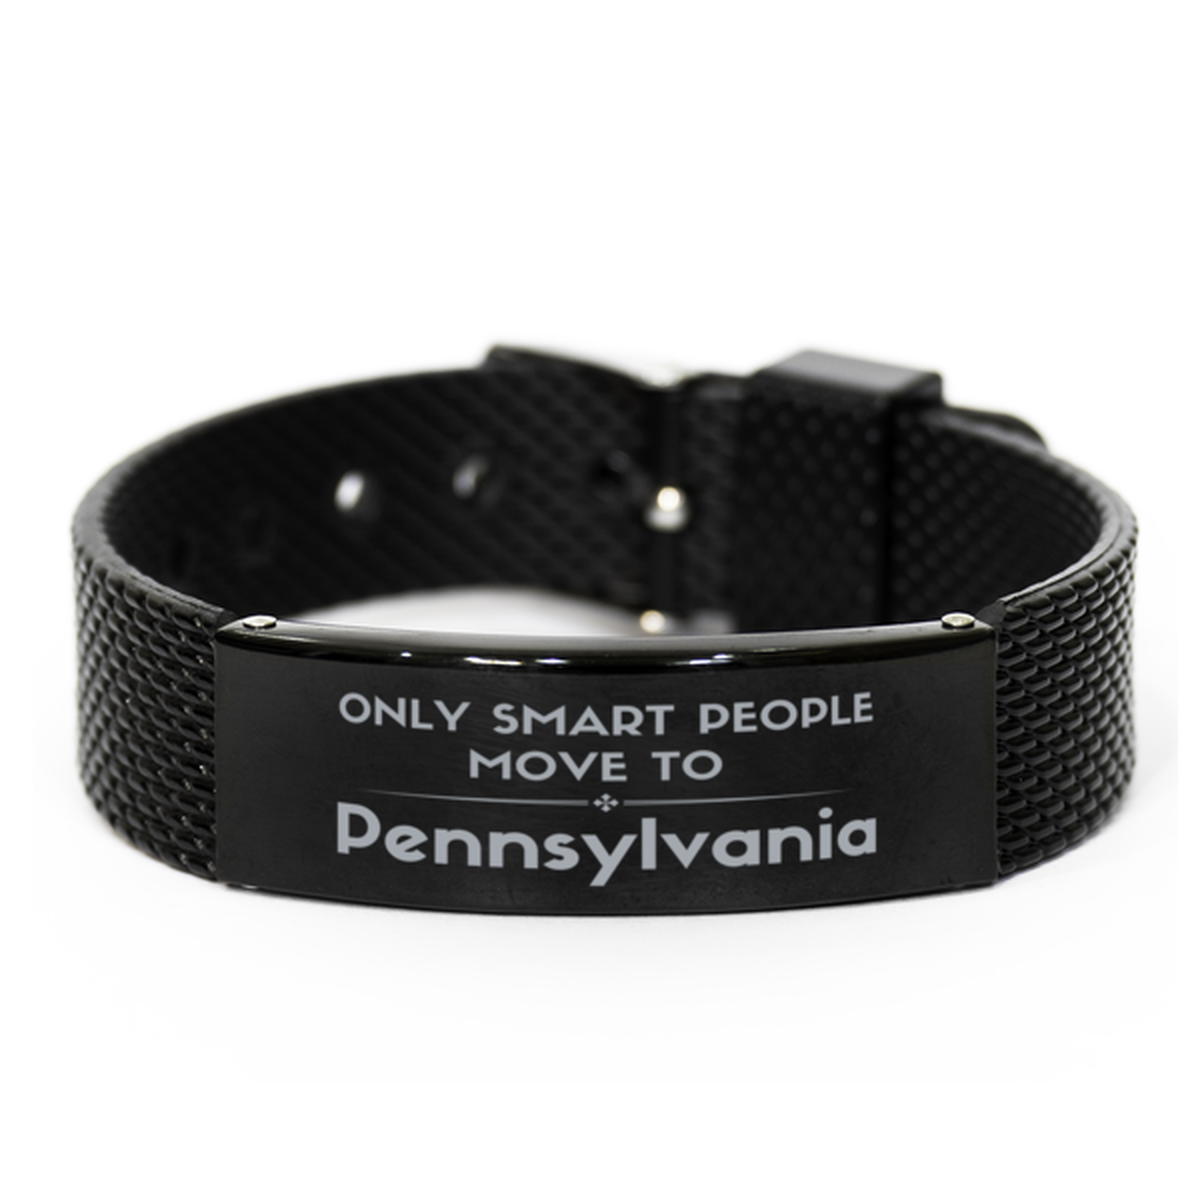 Only smart people move to Pennsylvania Black Shark Mesh Bracelet, Gag Gifts For Pennsylvania, Move to Pennsylvania Gifts for Friends Coworker Funny Saying Quote